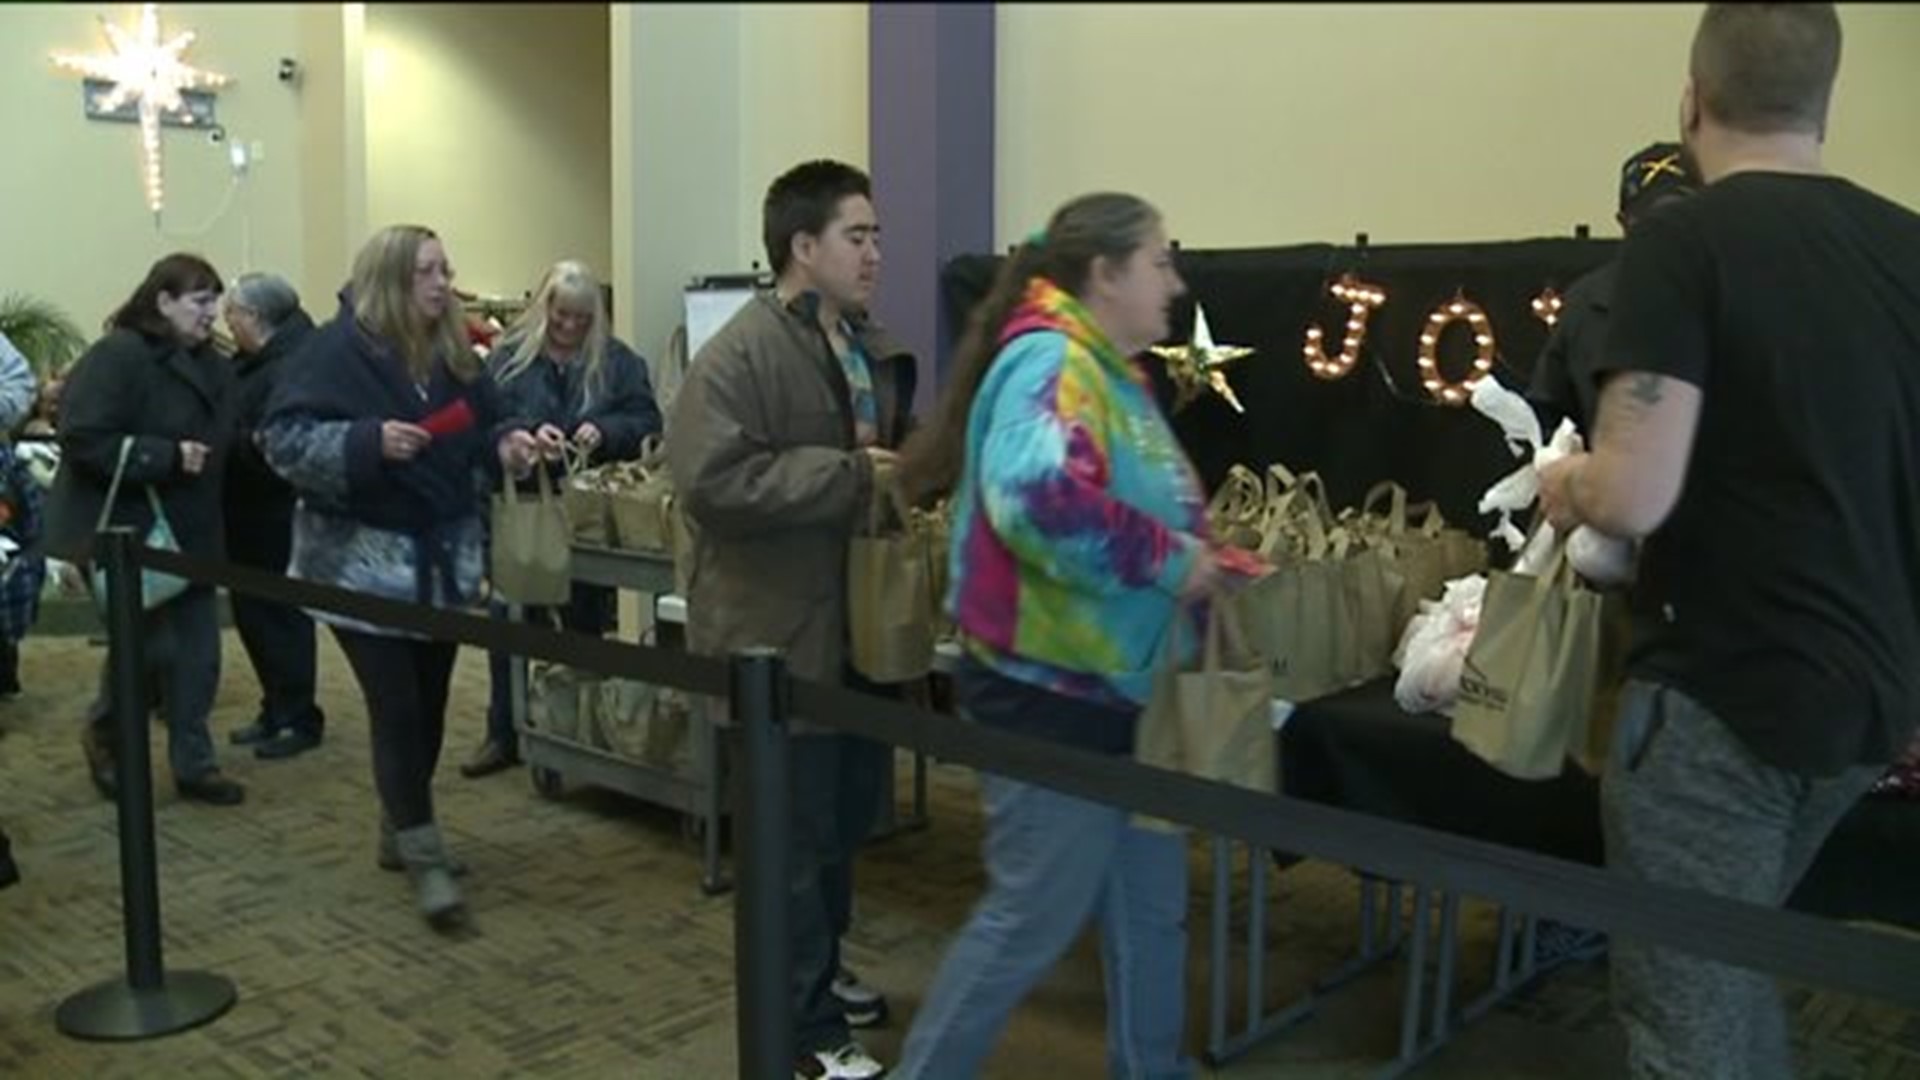 Church Community Hands Out Free Turkeys to Families